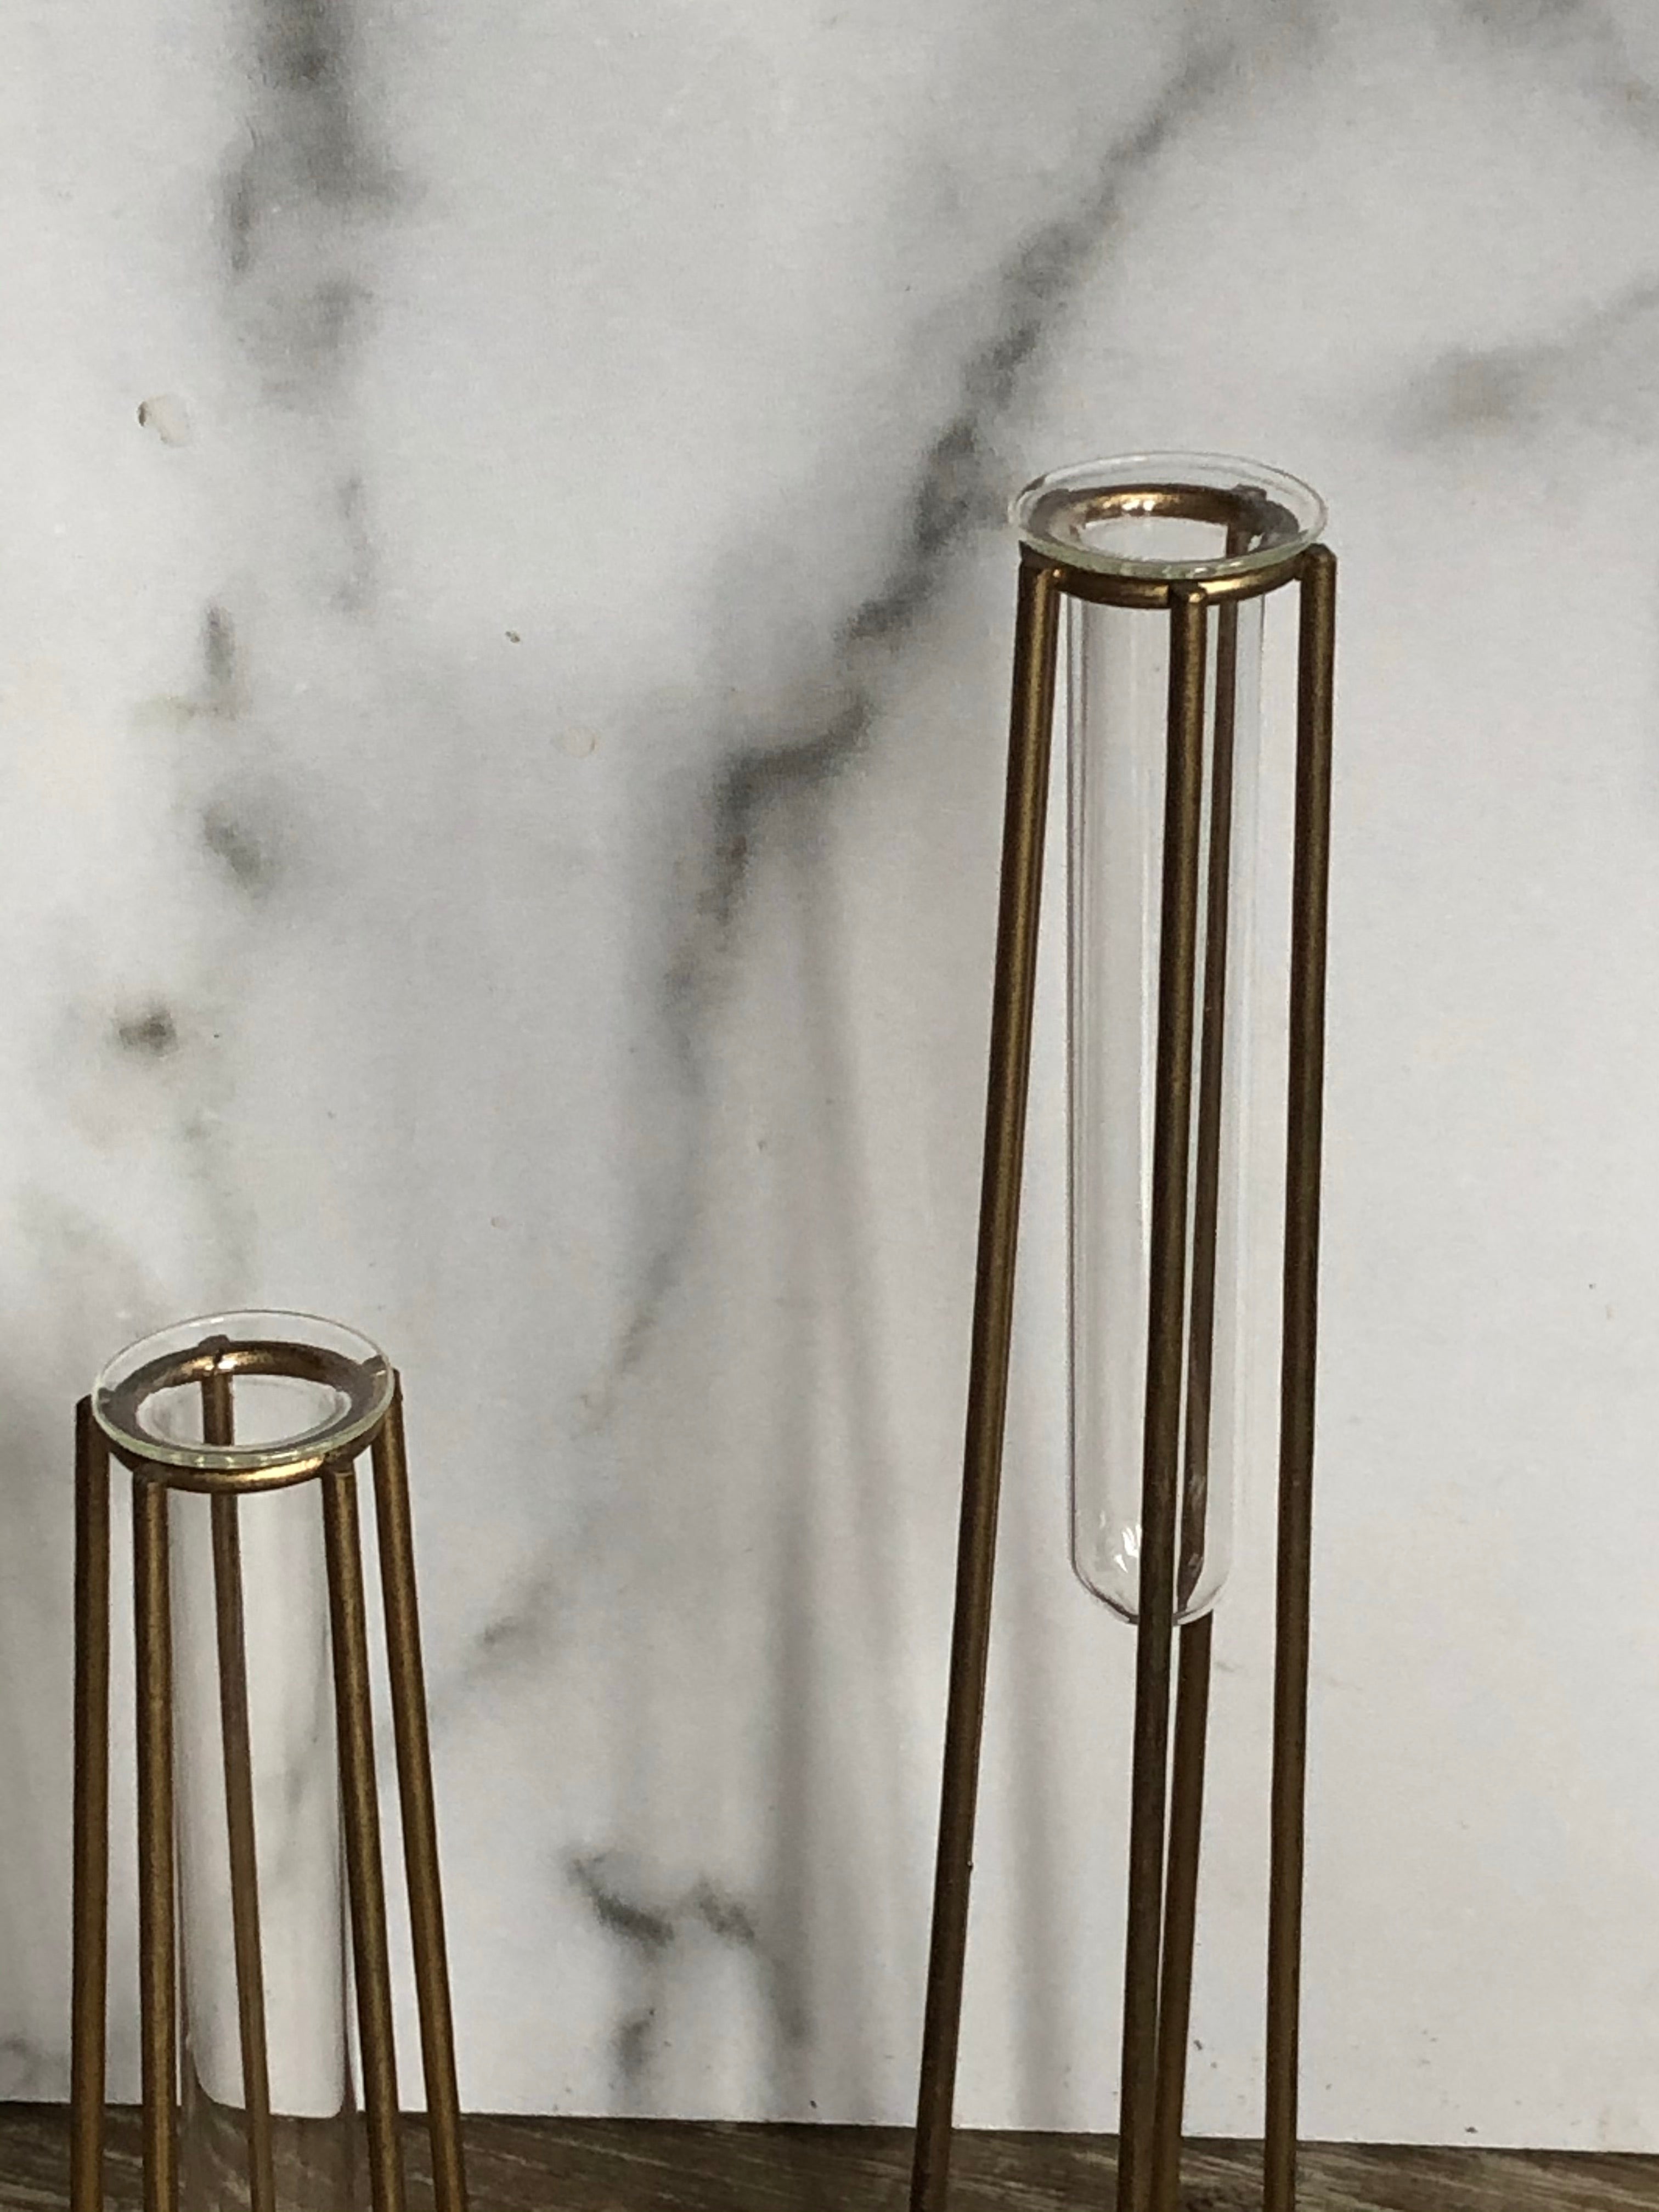 How I went about making breakaway sugar glass vases - Step by step :  r/techtheatre